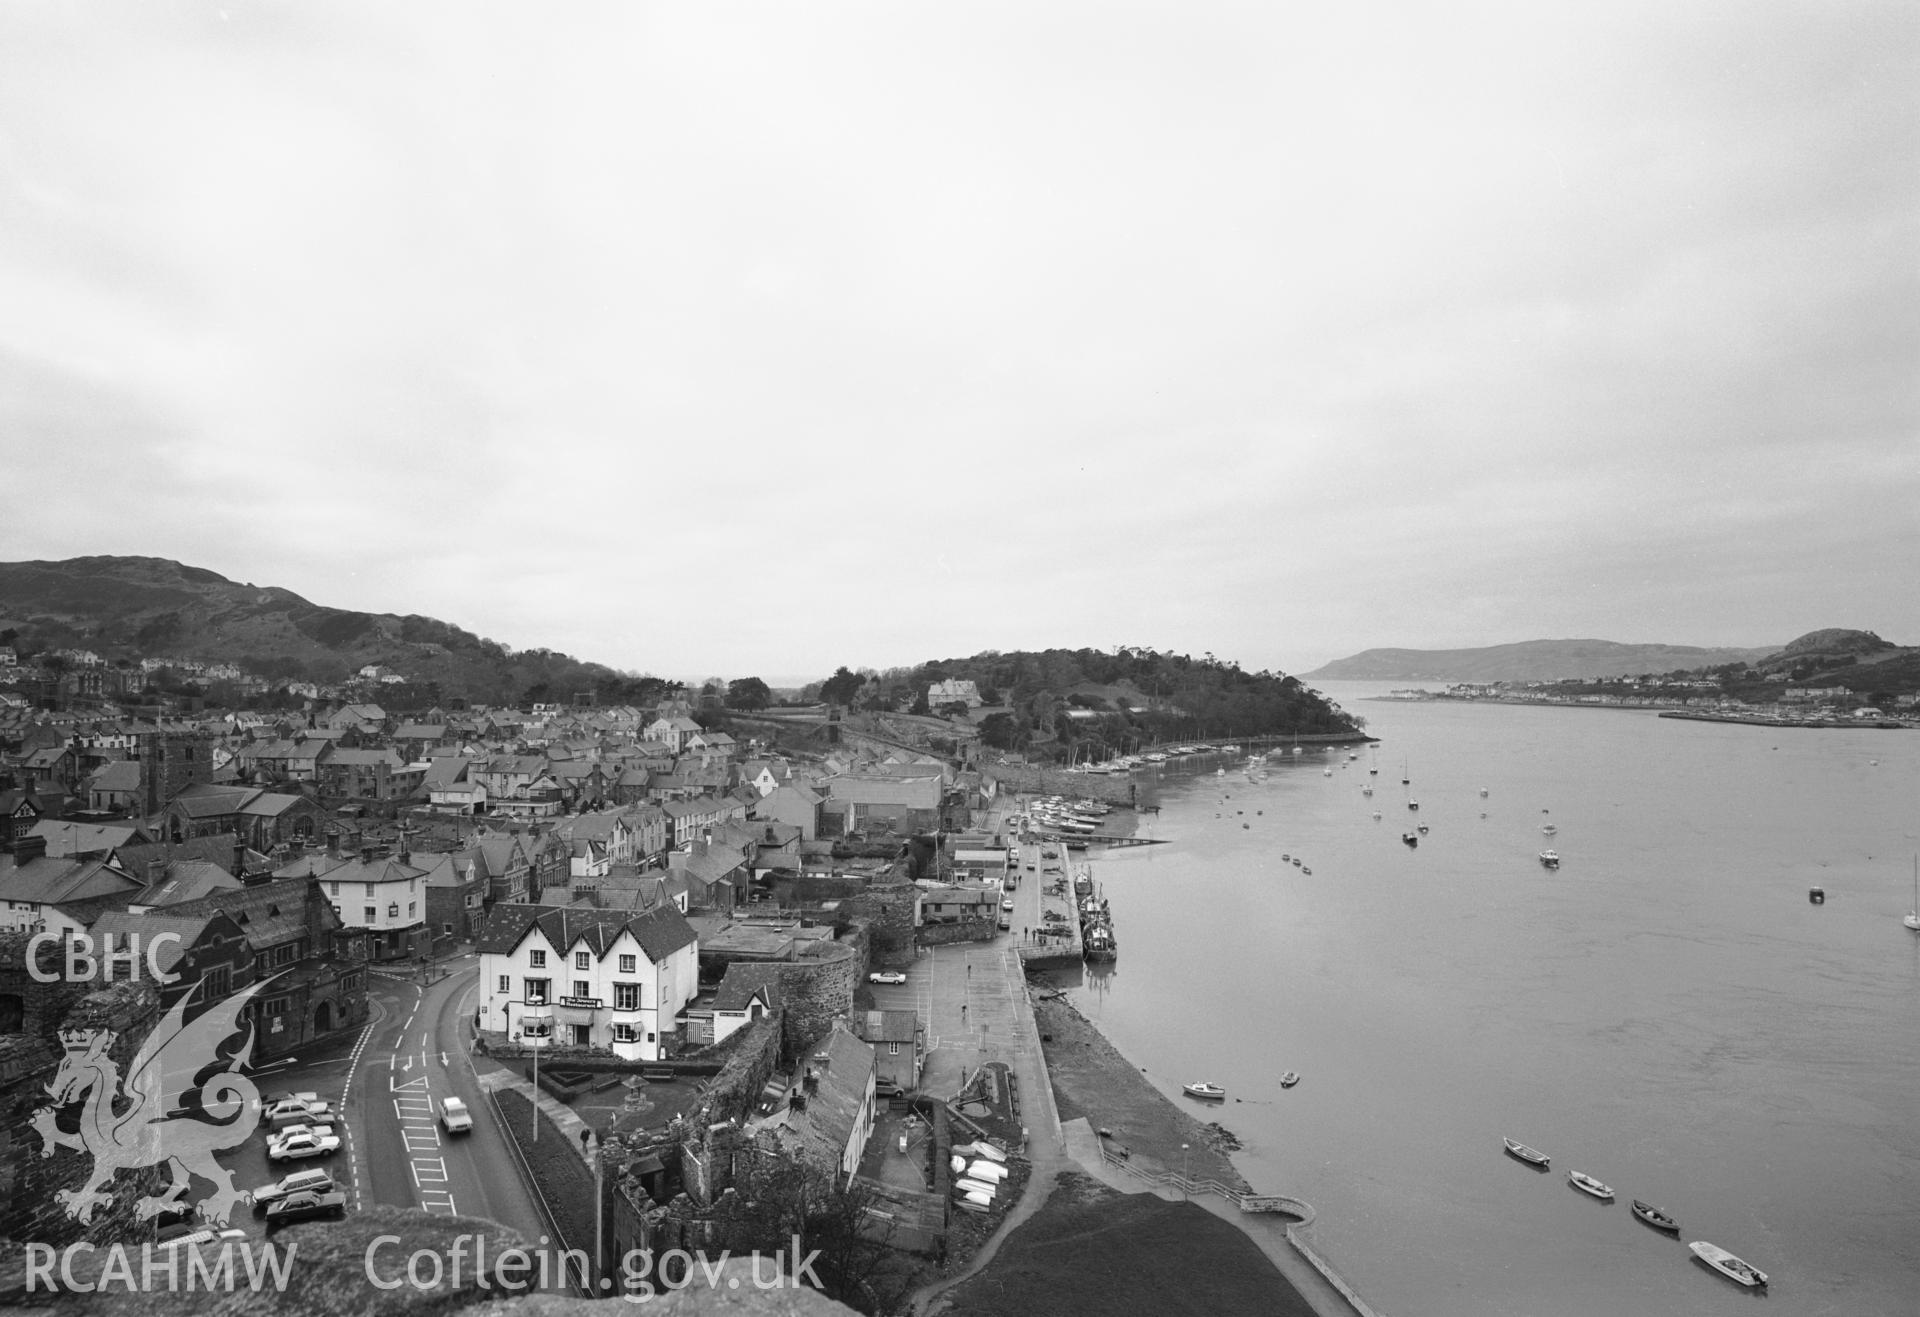 Photographic negative showing view of Conwy; collated by the former Central Office of Information.